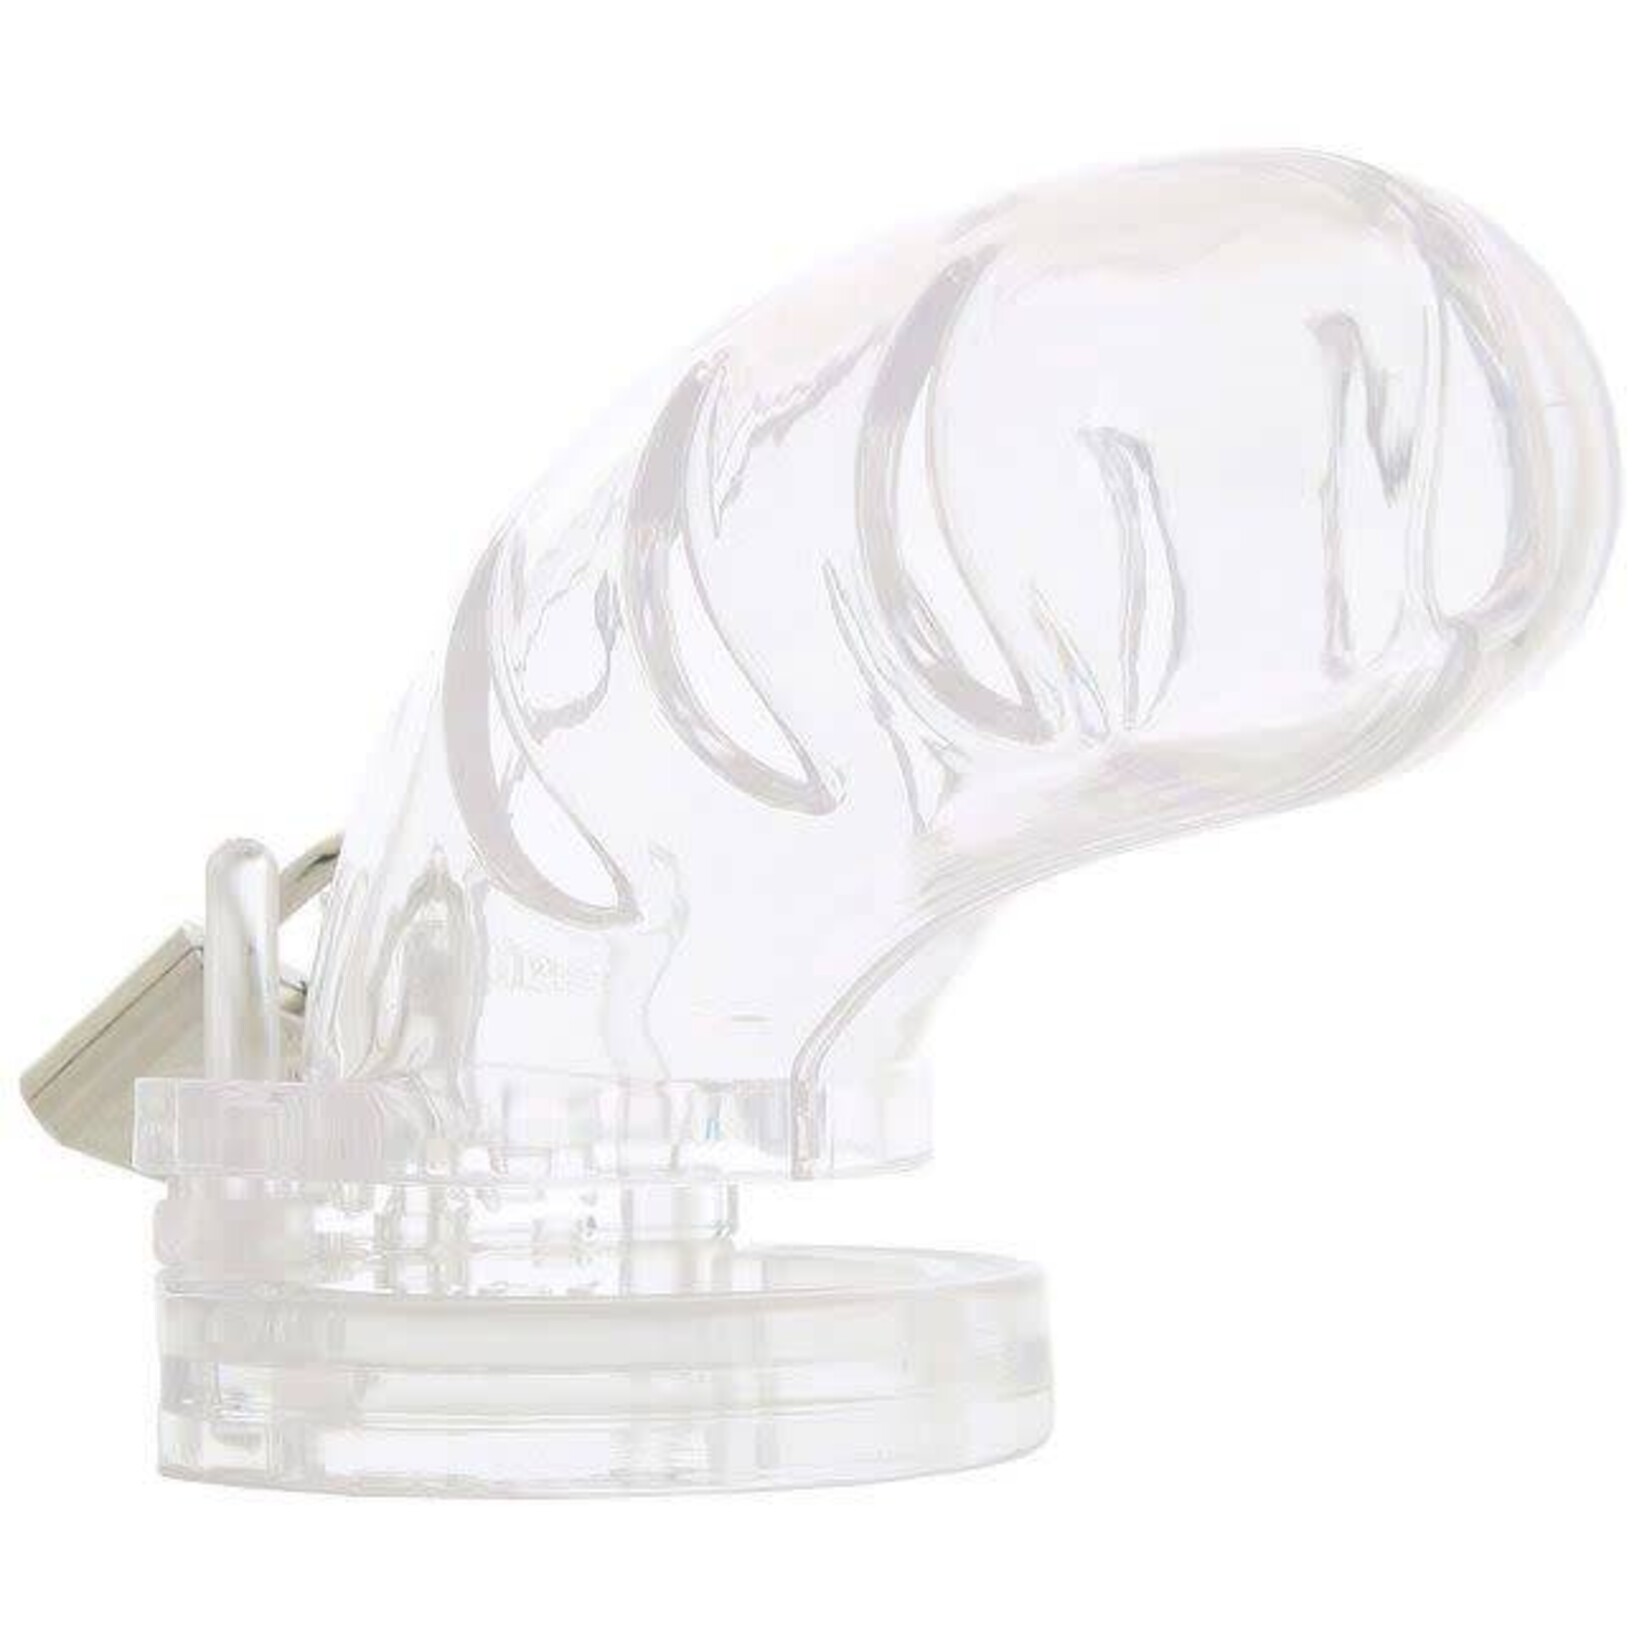 Shots America Man|Cage 03 4.5" Chastity Device